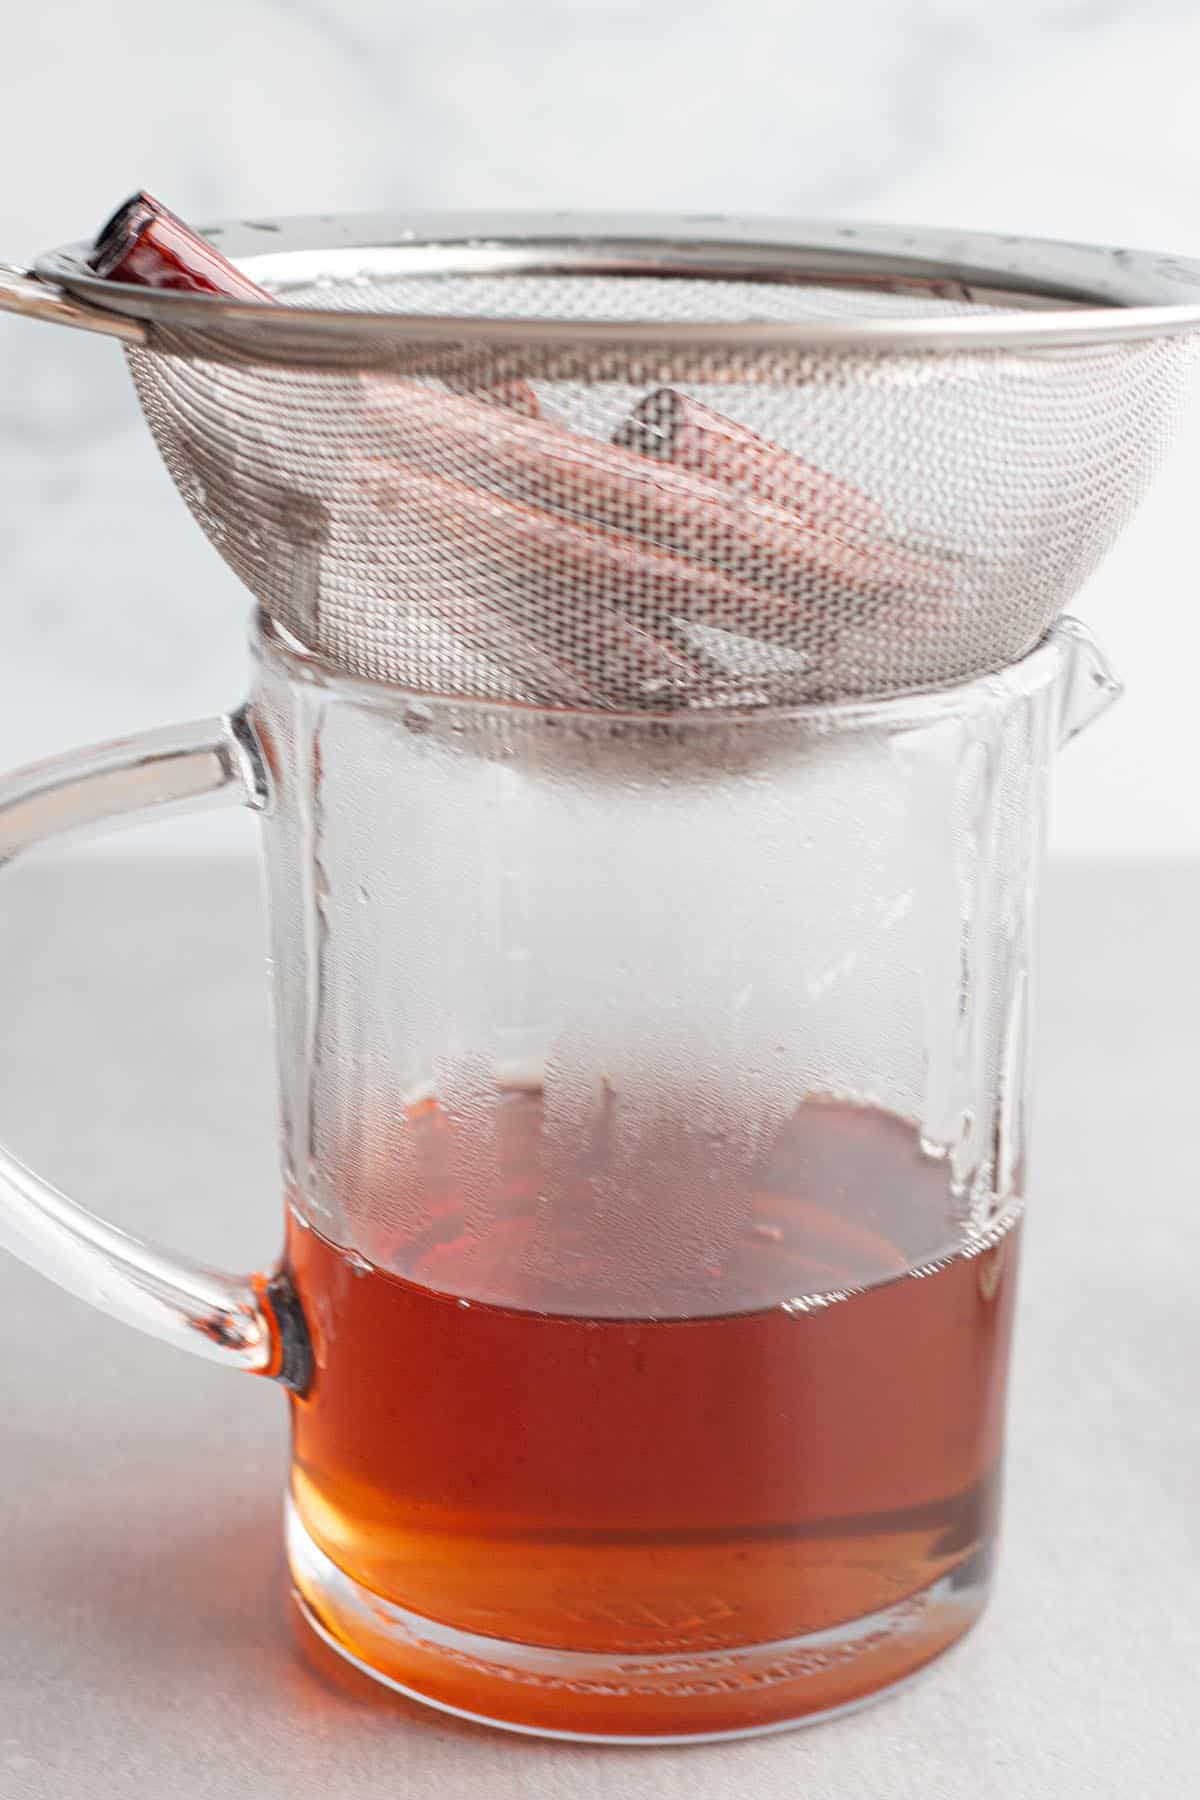 A liquid measuring cup with a fine mesh strainer on top.